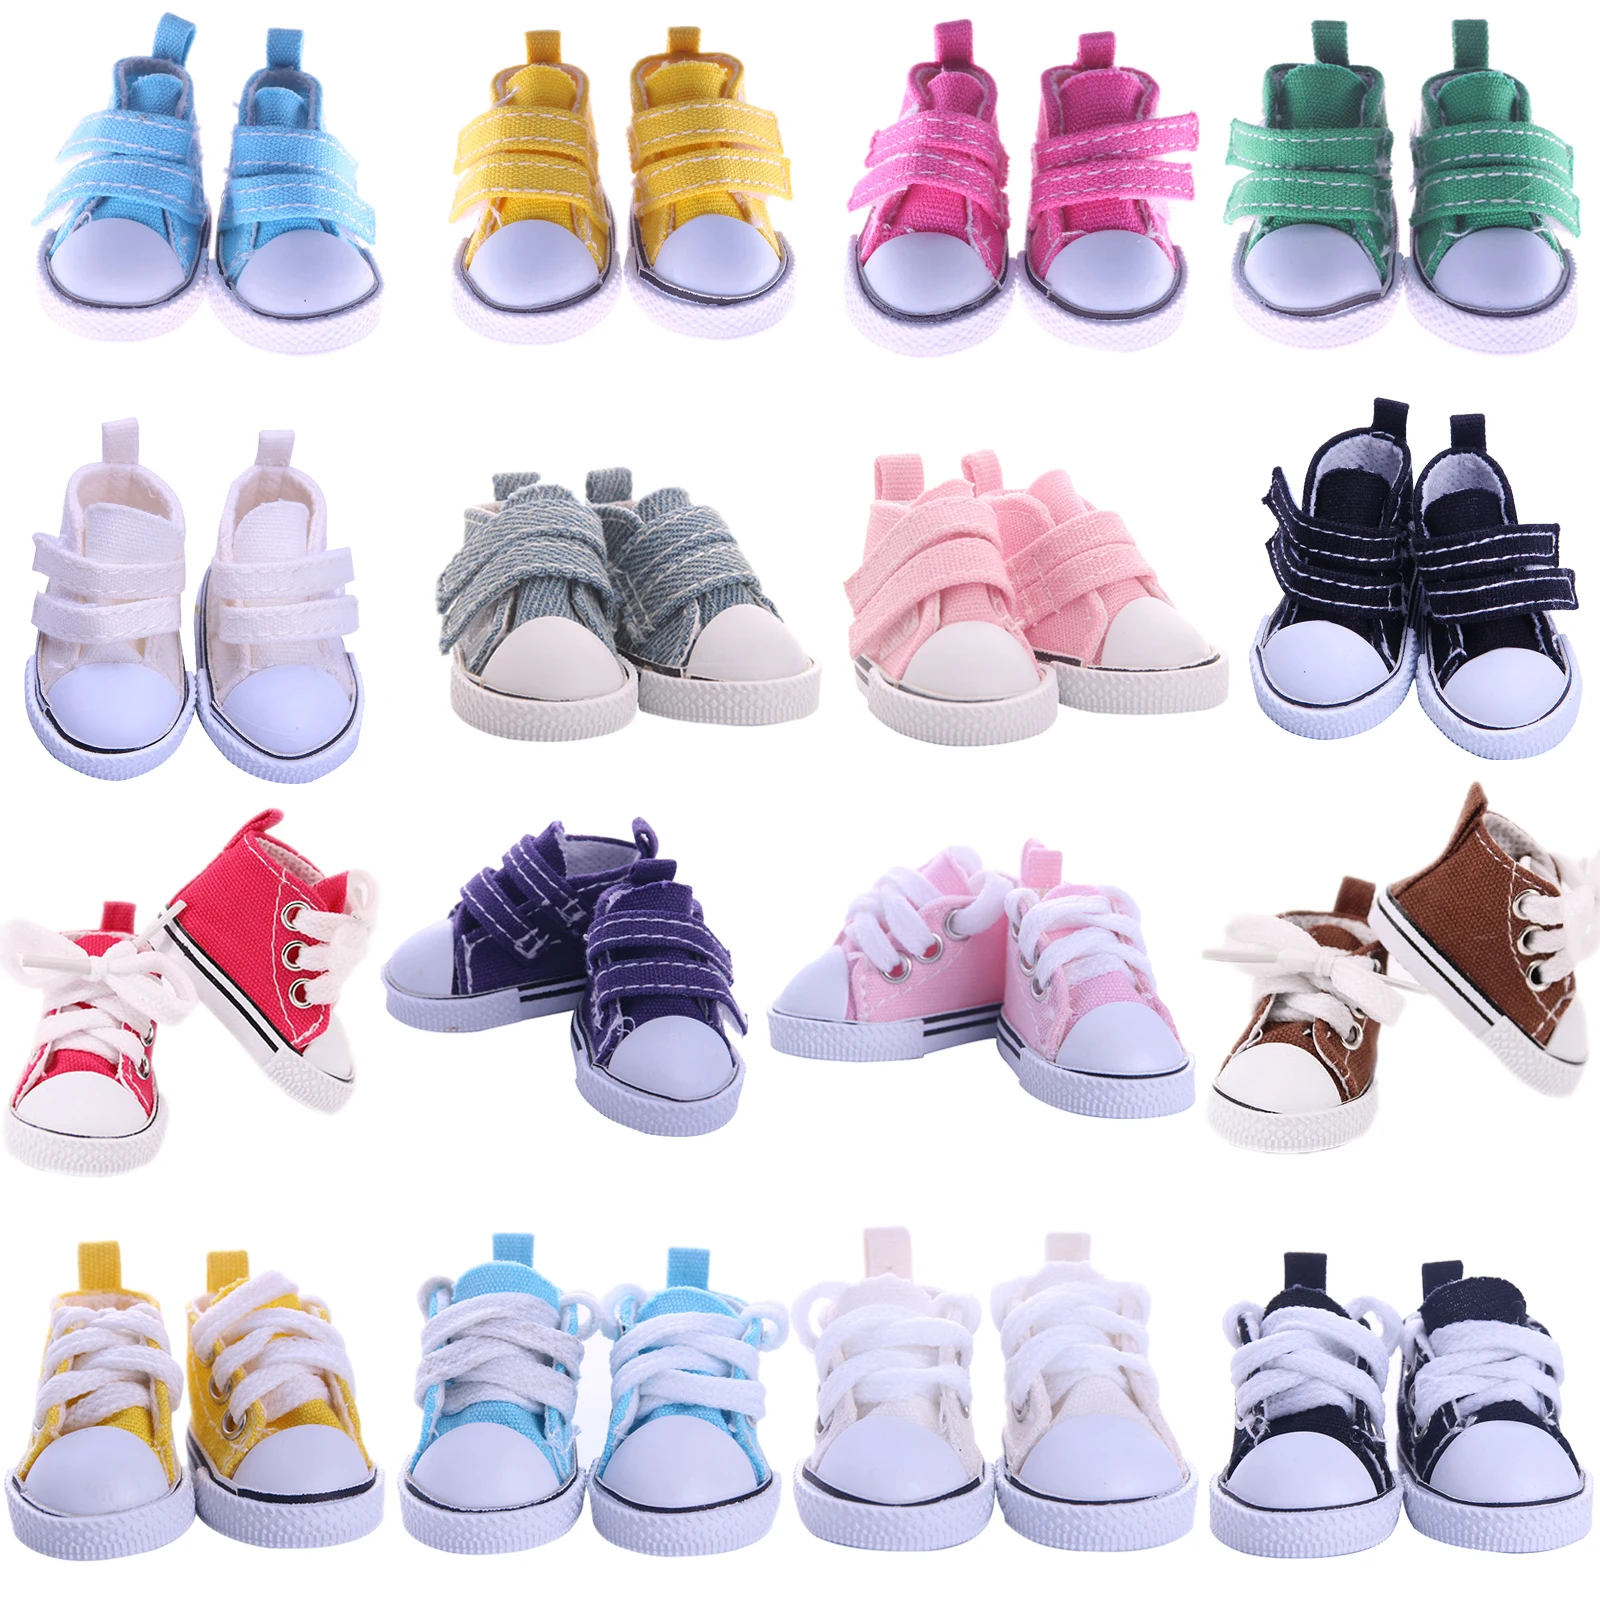 5cm Doll Shoes Multicolor Canvas Shoes With Shoelace Velcro For 14inch ...